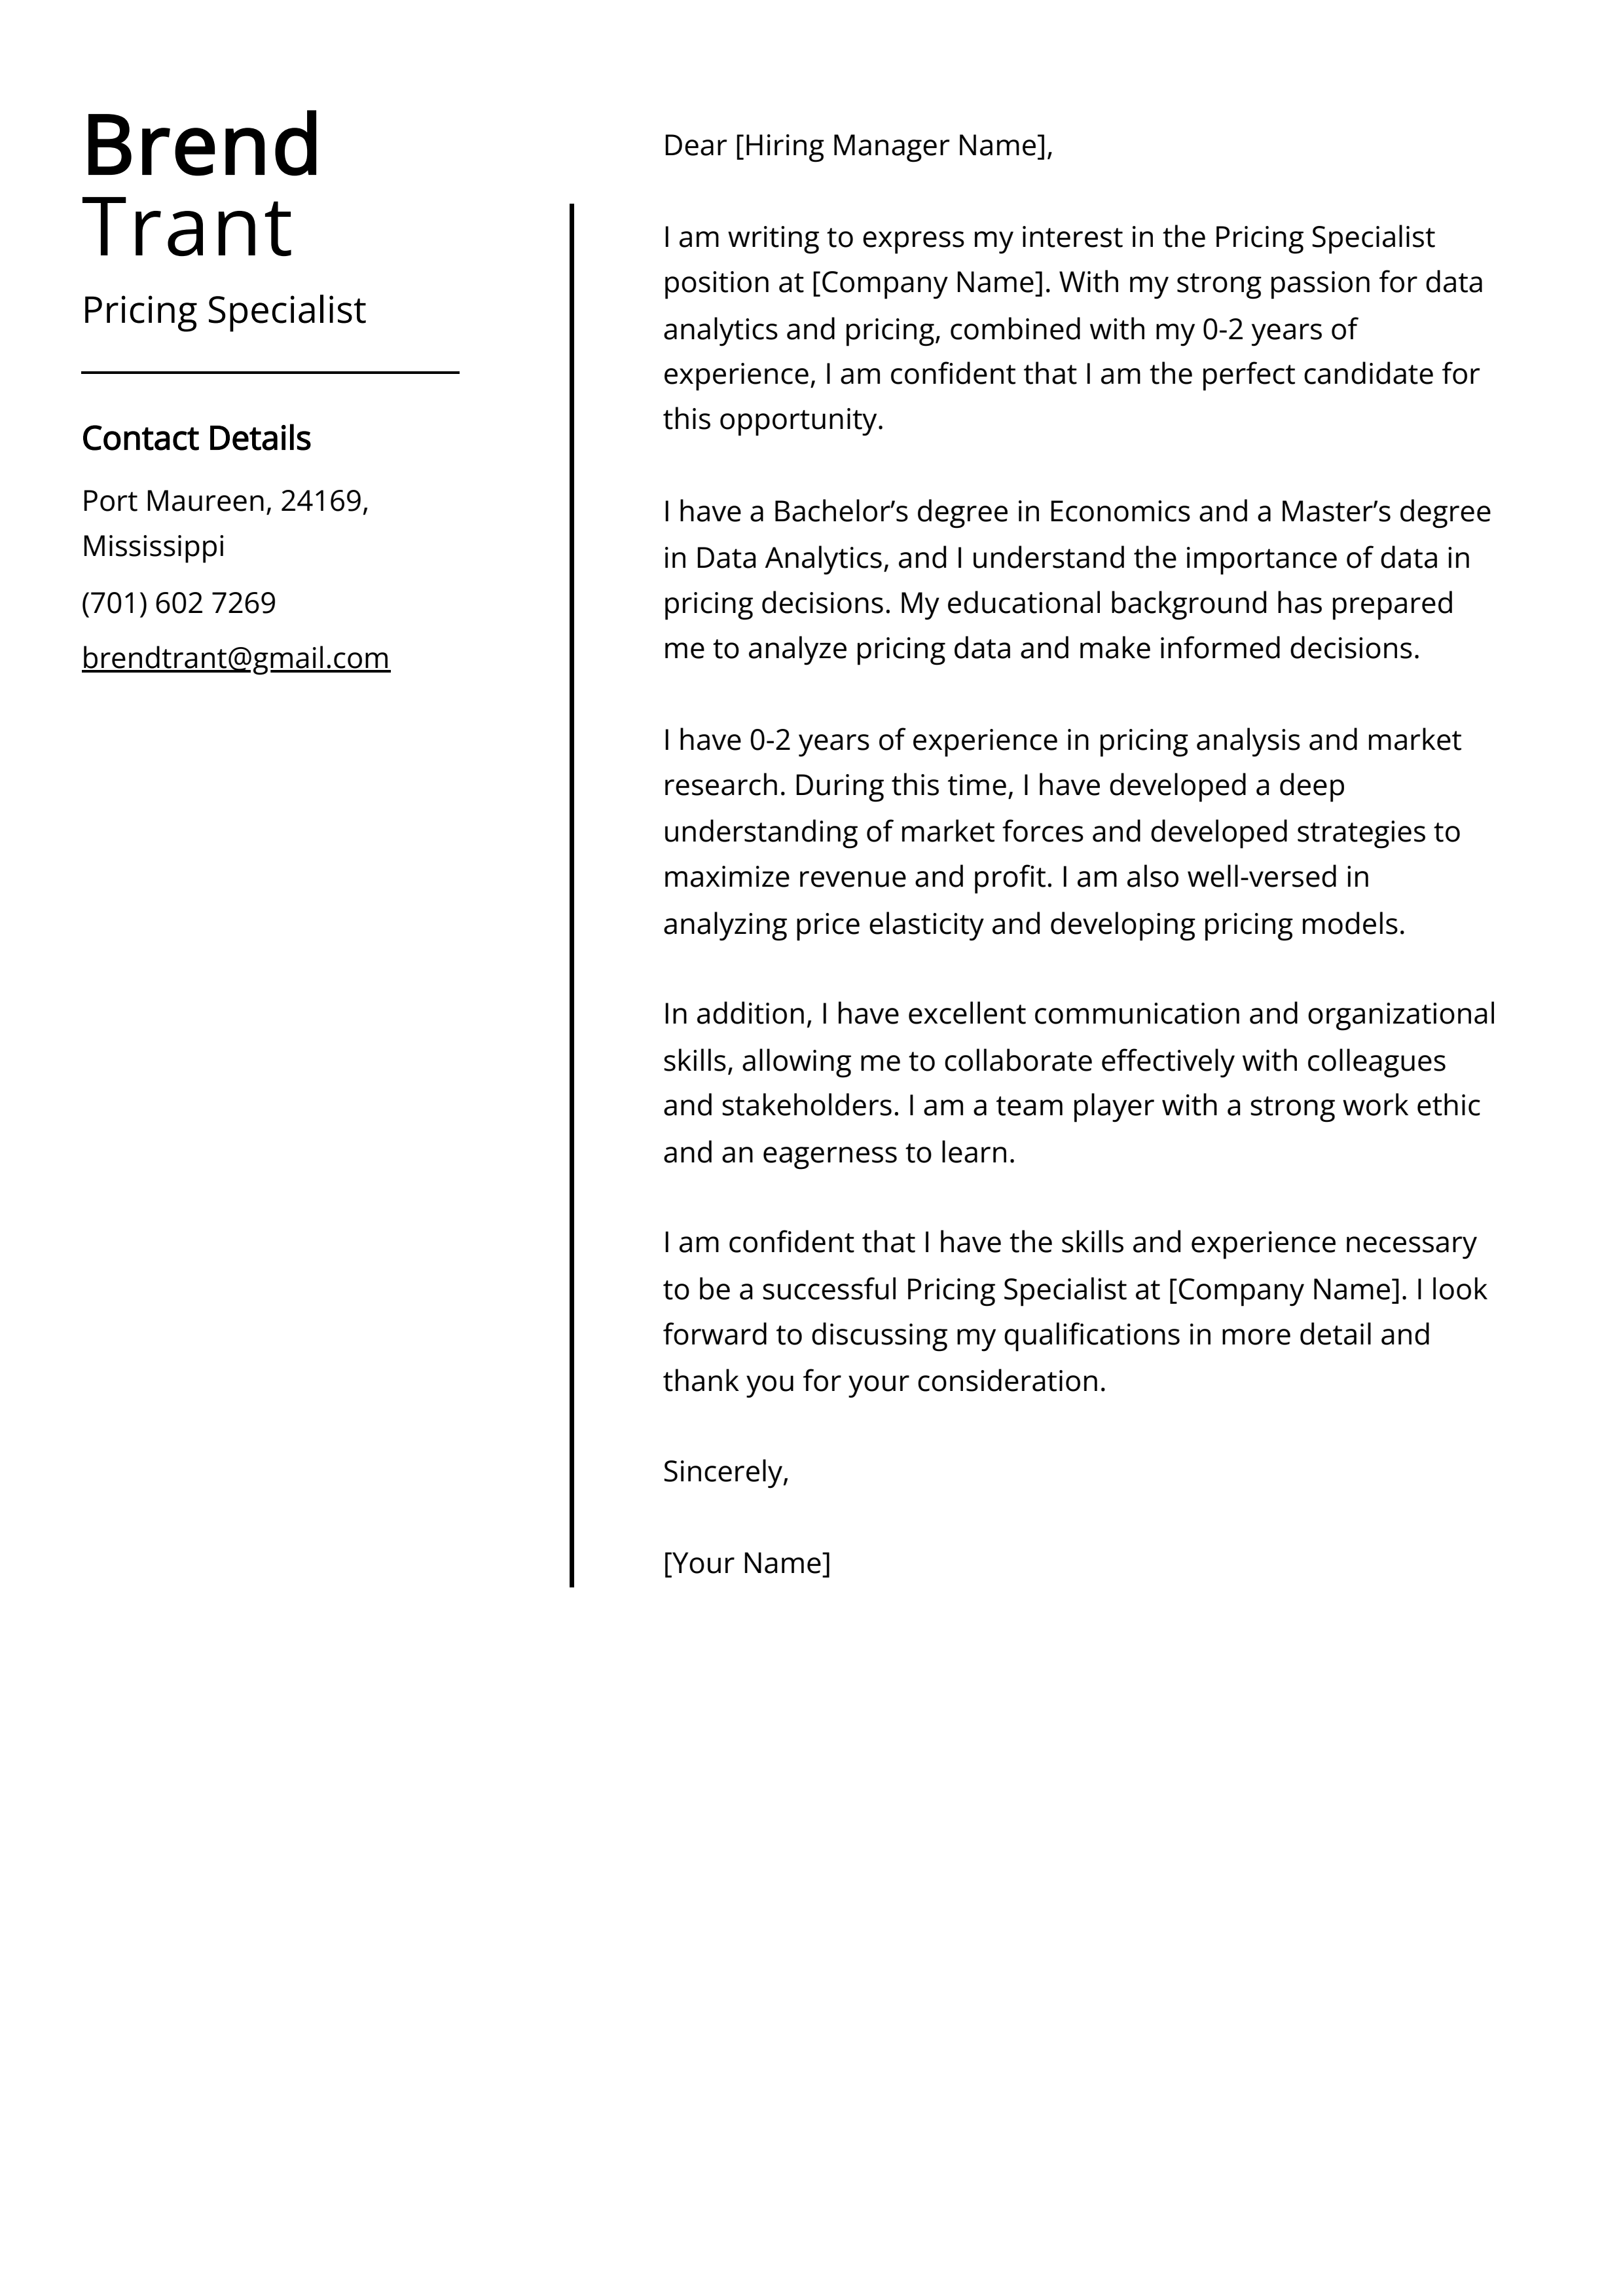 Pricing Specialist Cover Letter Example